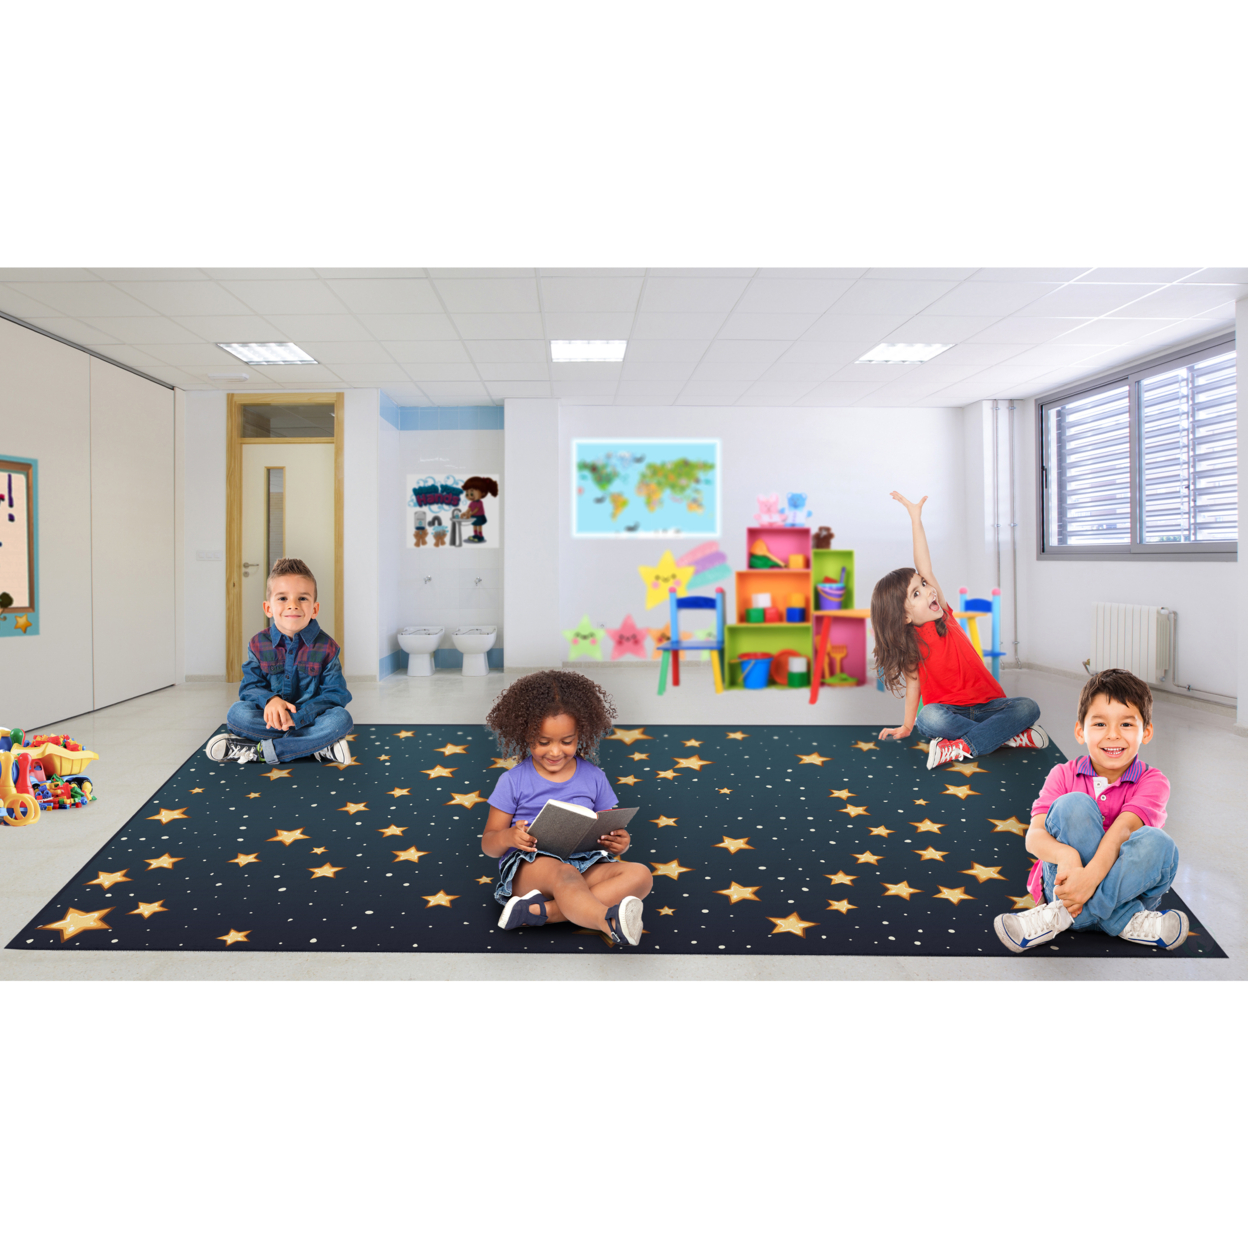 Deerlux 6 Ft. Social Distancing Colorful Kids Classroom Seating Area Rug, Starry Sky Design - Extra Large